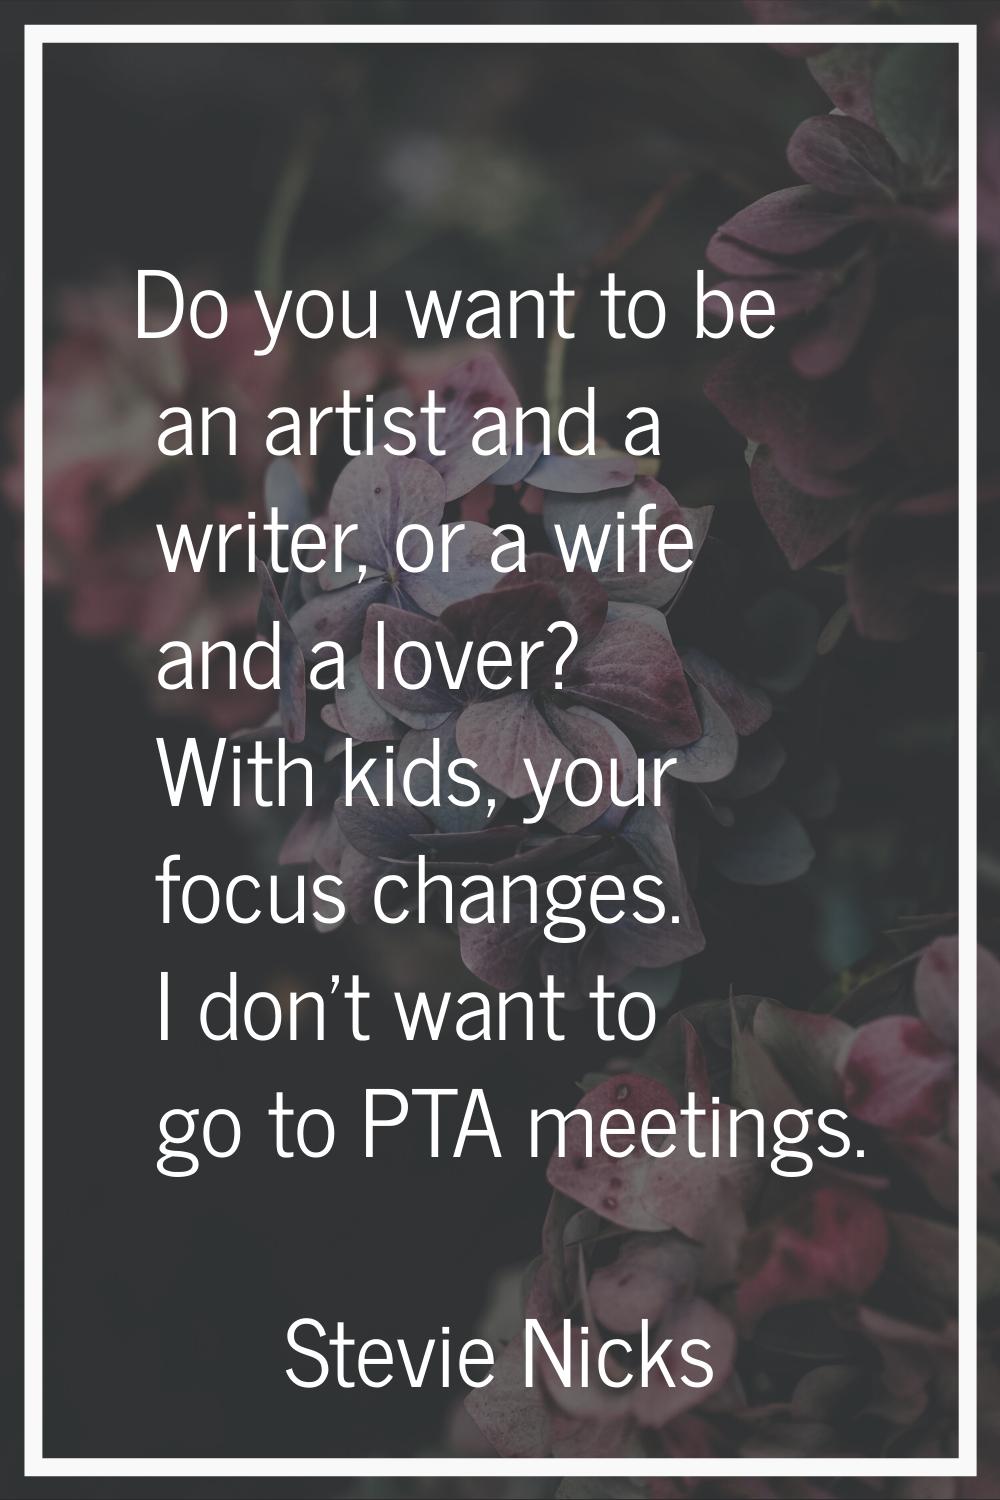 Do you want to be an artist and a writer, or a wife and a lover? With kids, your focus changes. I d